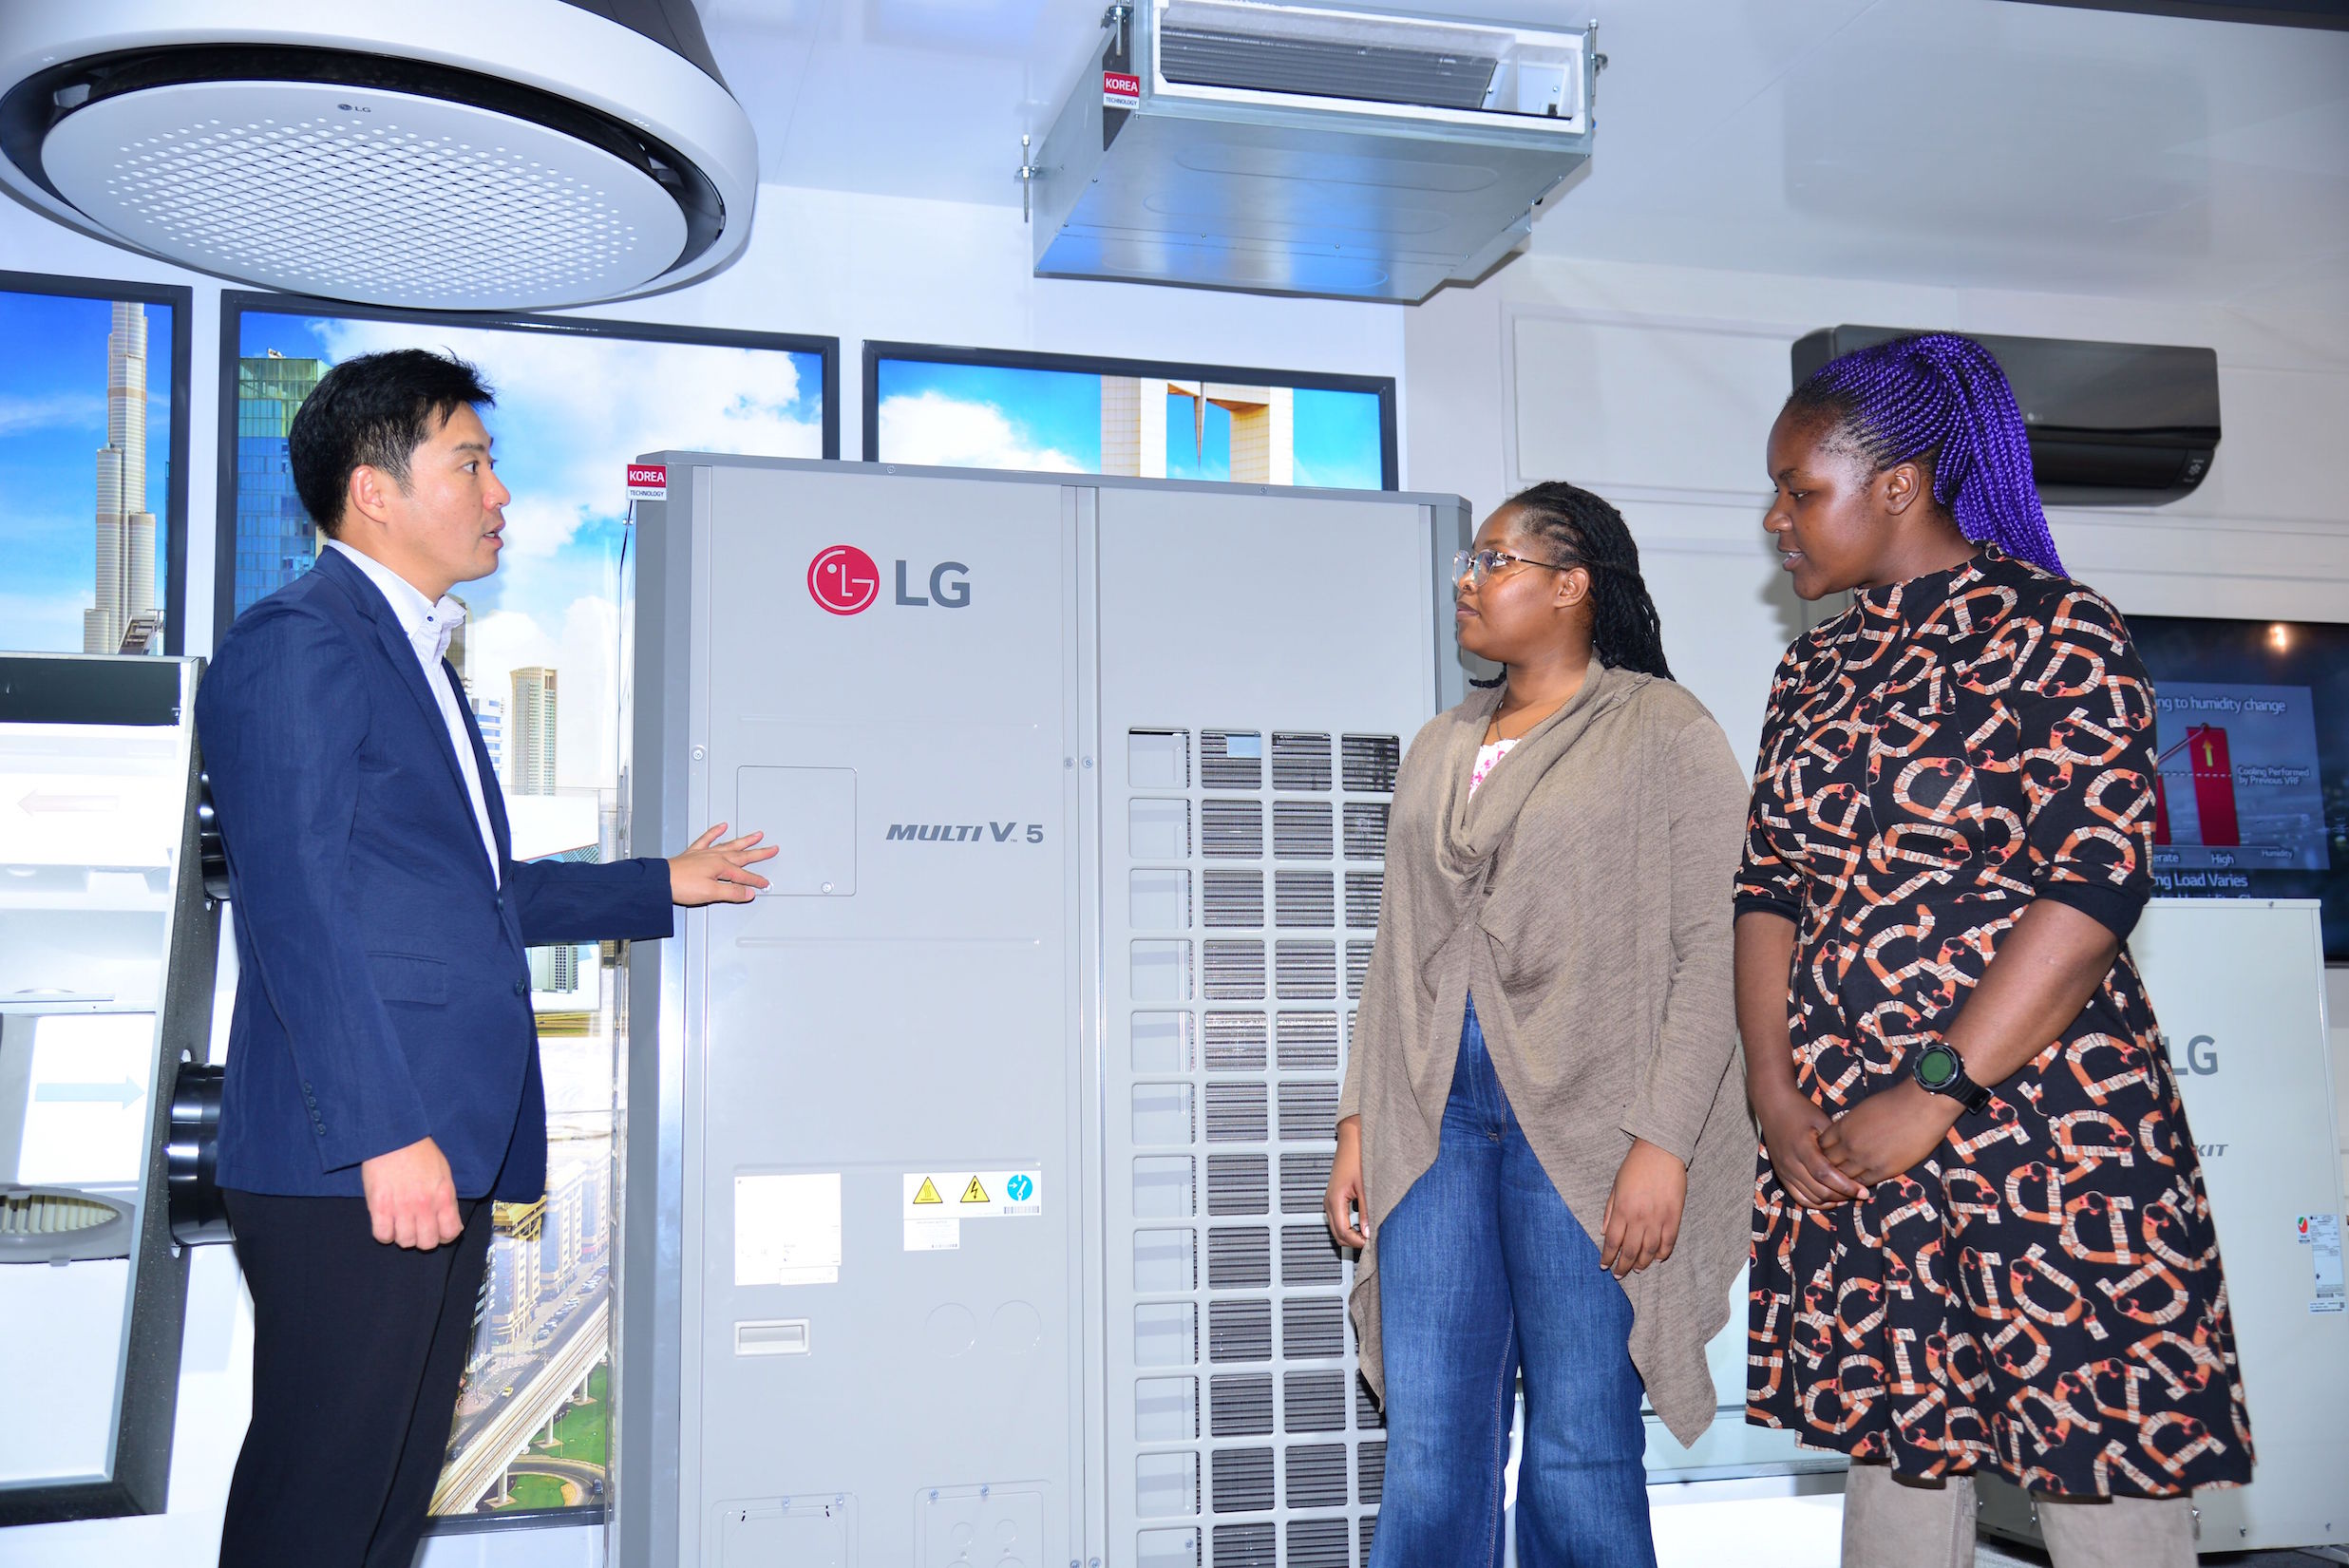 (L-R), LG Electronics Air Solution Product Manager Yeonguk Yun explains some of the LG Electronics air solutions technology to Kenyatta University students Shirleen Mwangi and Georgina Muringo from the Korean Language & Culture Center (Nairobi King Sejong Institute). This took place during an excursion at LG offices by students from the said school, providing an opportunity for the LG team to introduce the students to the Korean work environment.